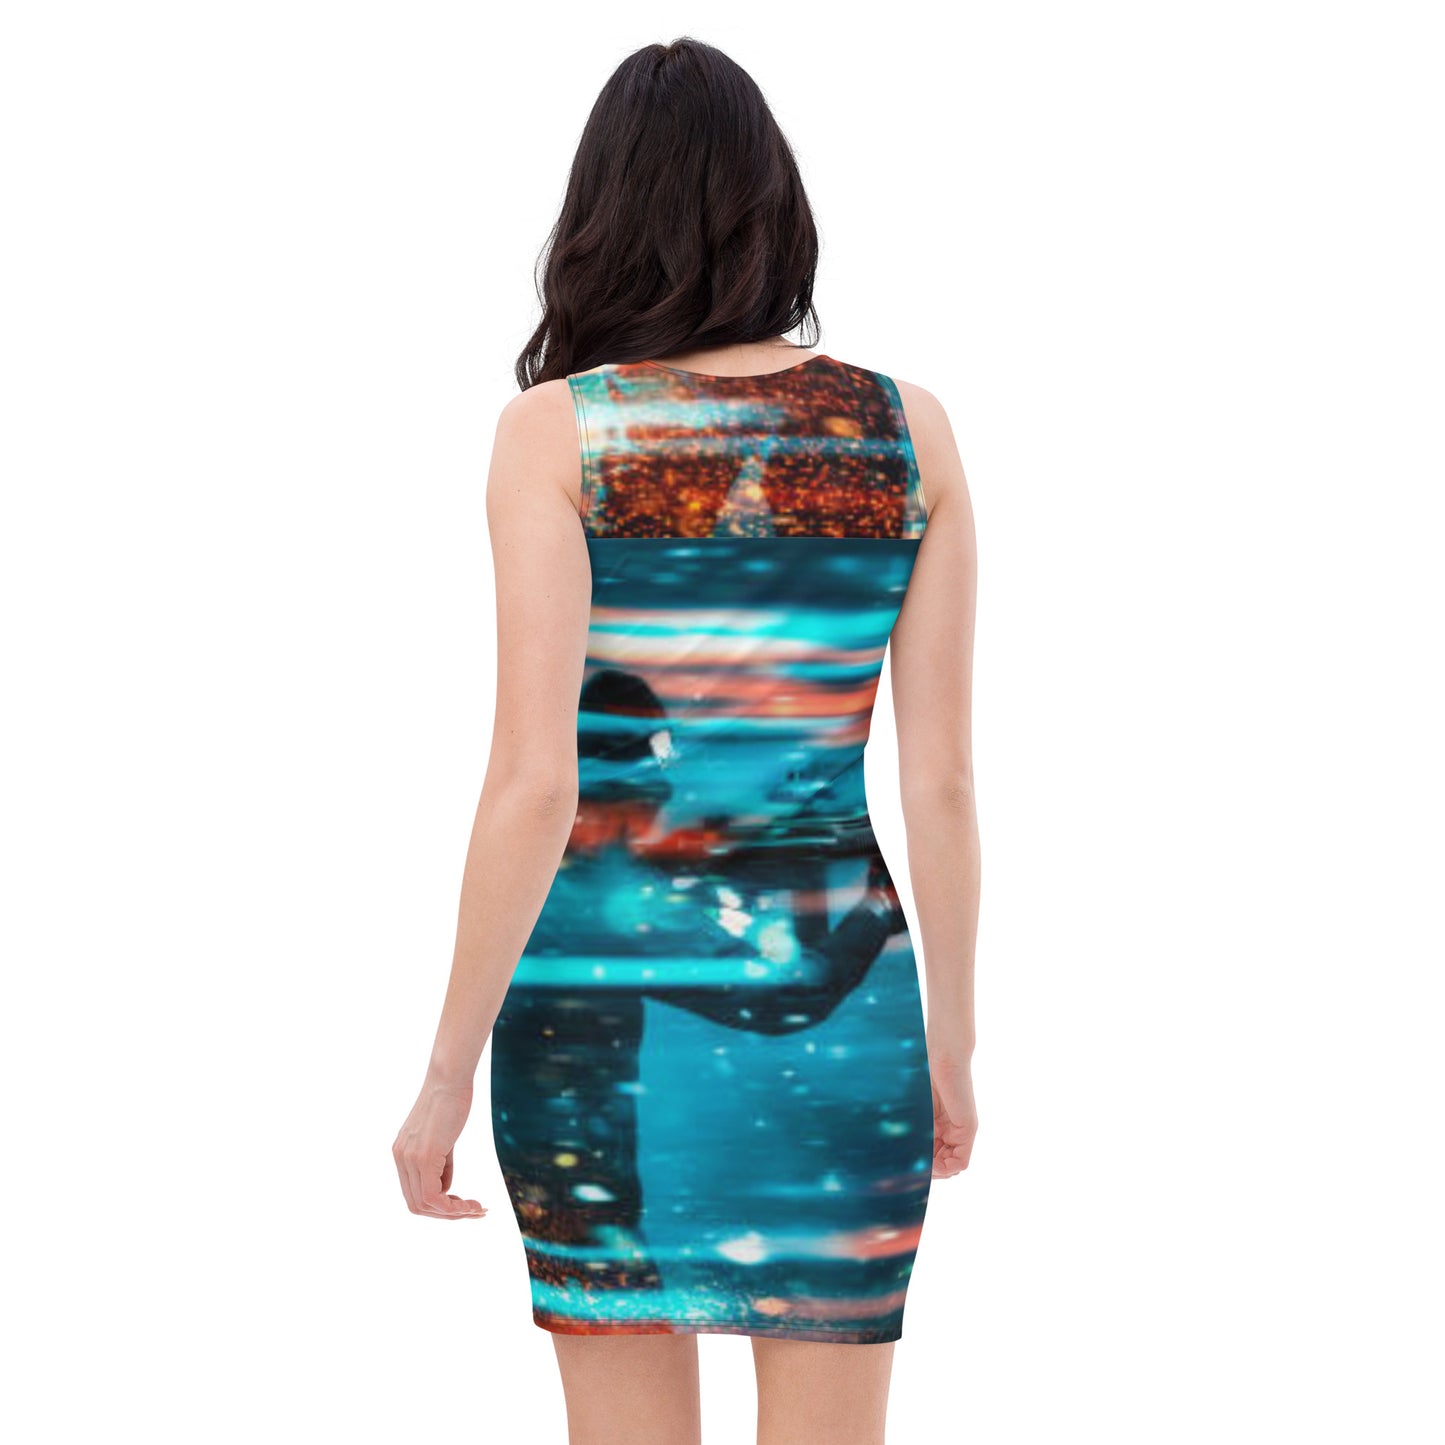 Mission Possible- Bodycon Dress